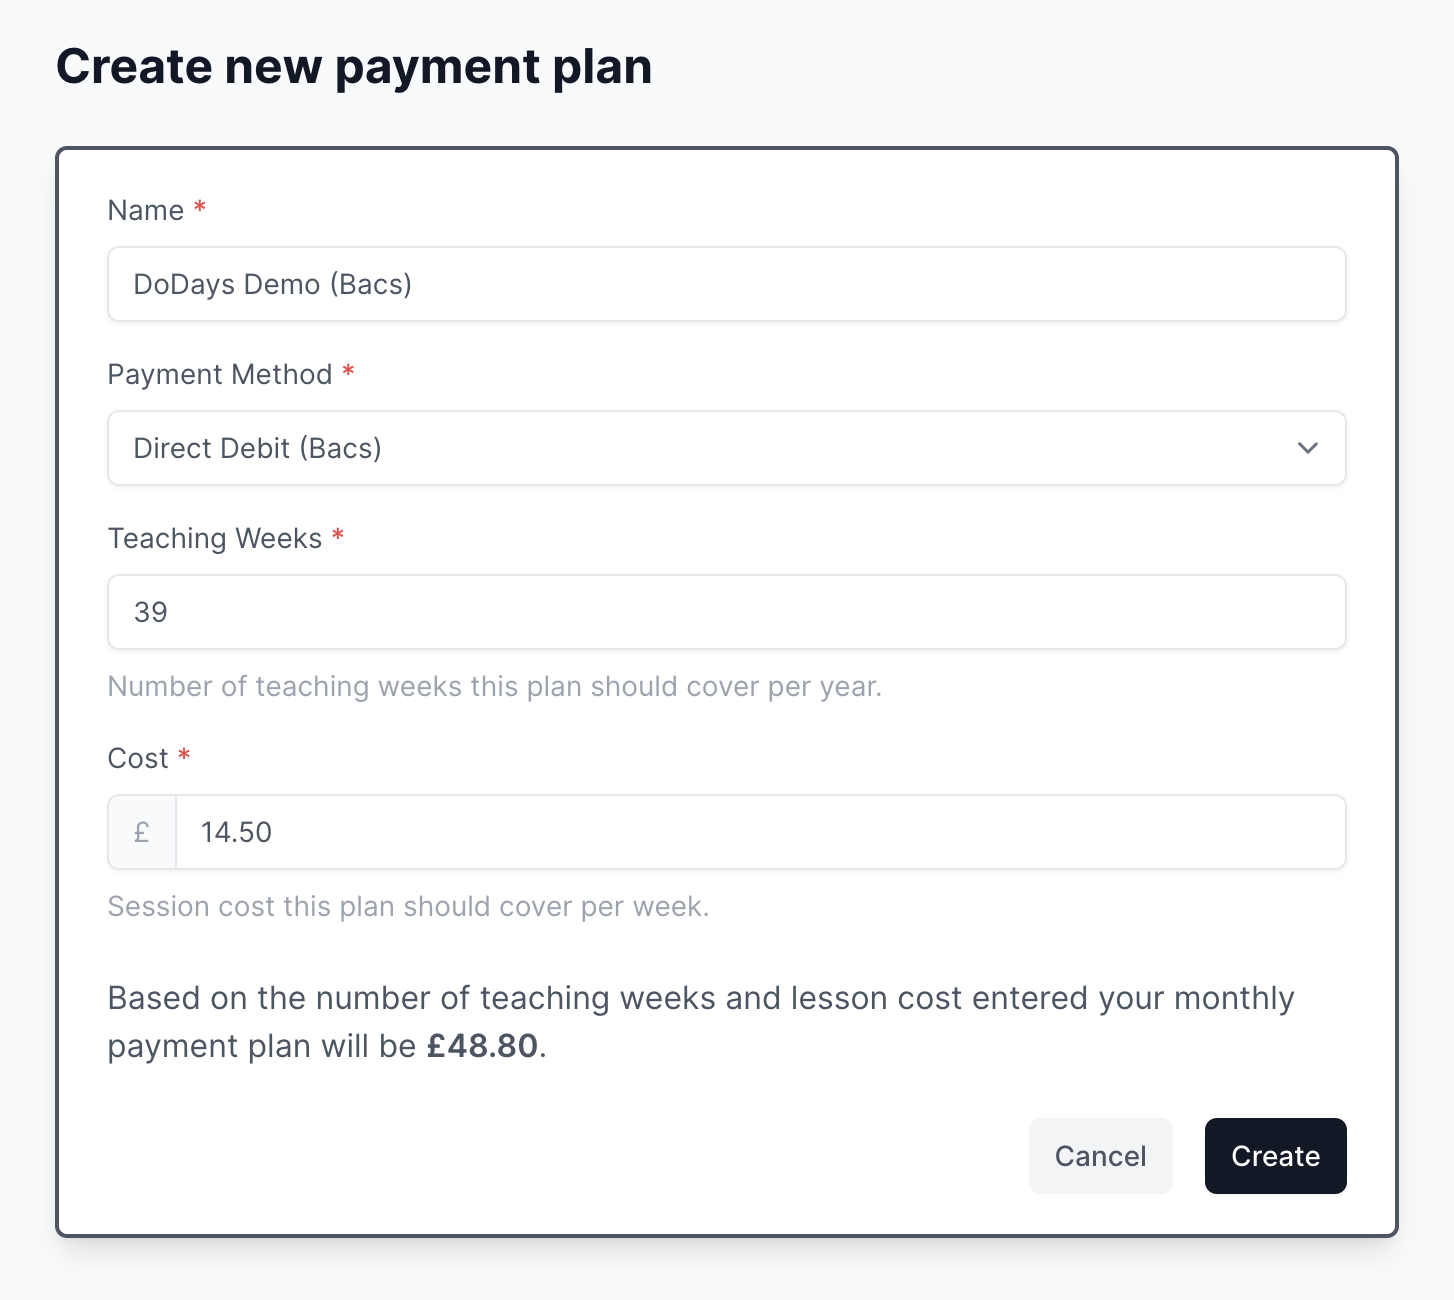 Create new payment plan